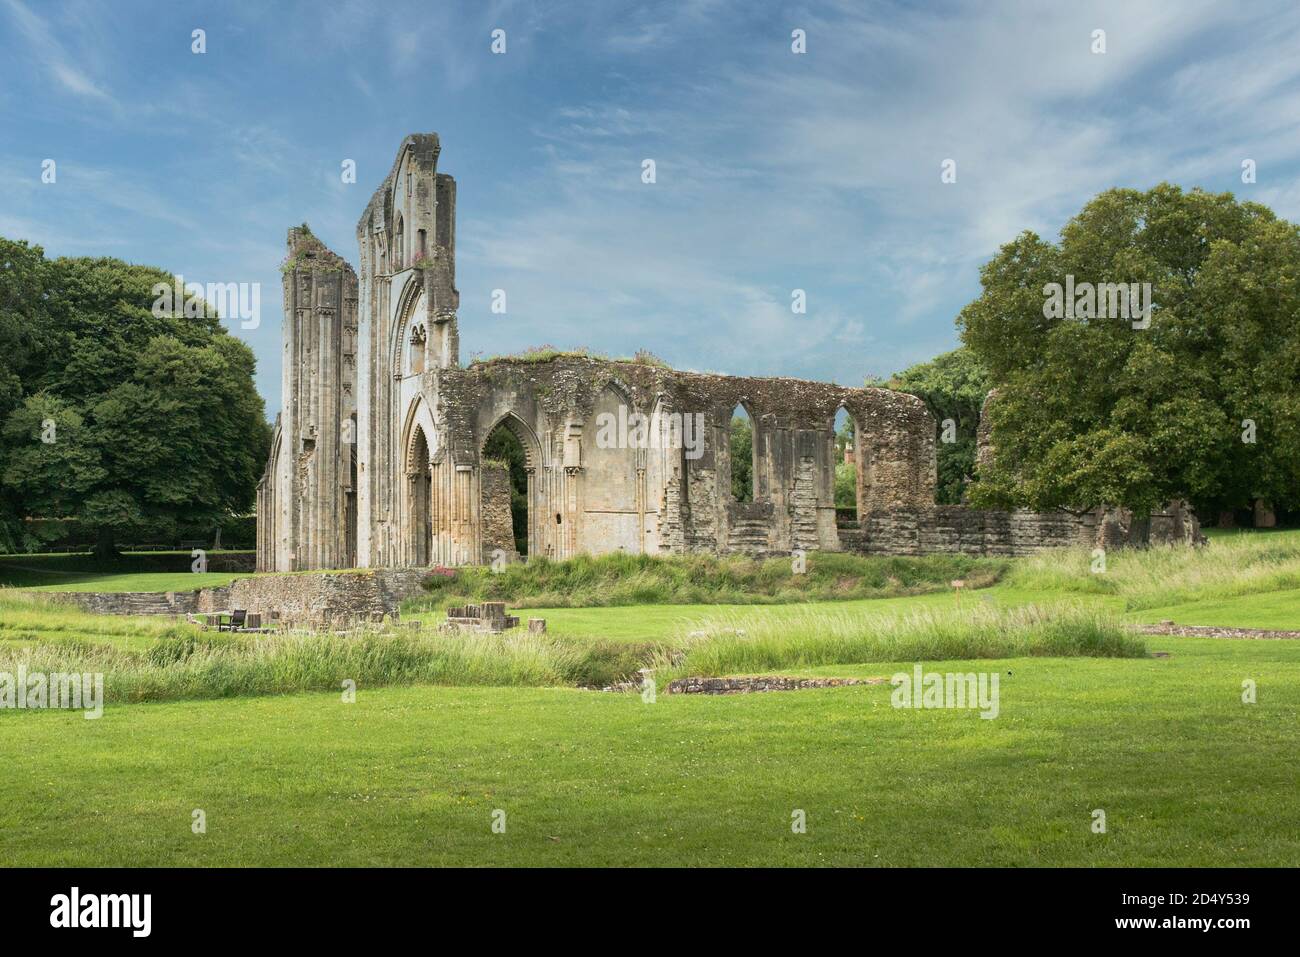 Ruins of Glastonbury Abbey church, Glastonbury, England on a beautiful blue sky day. South walls bays of the former monastery. Landscape format. Stock Photo